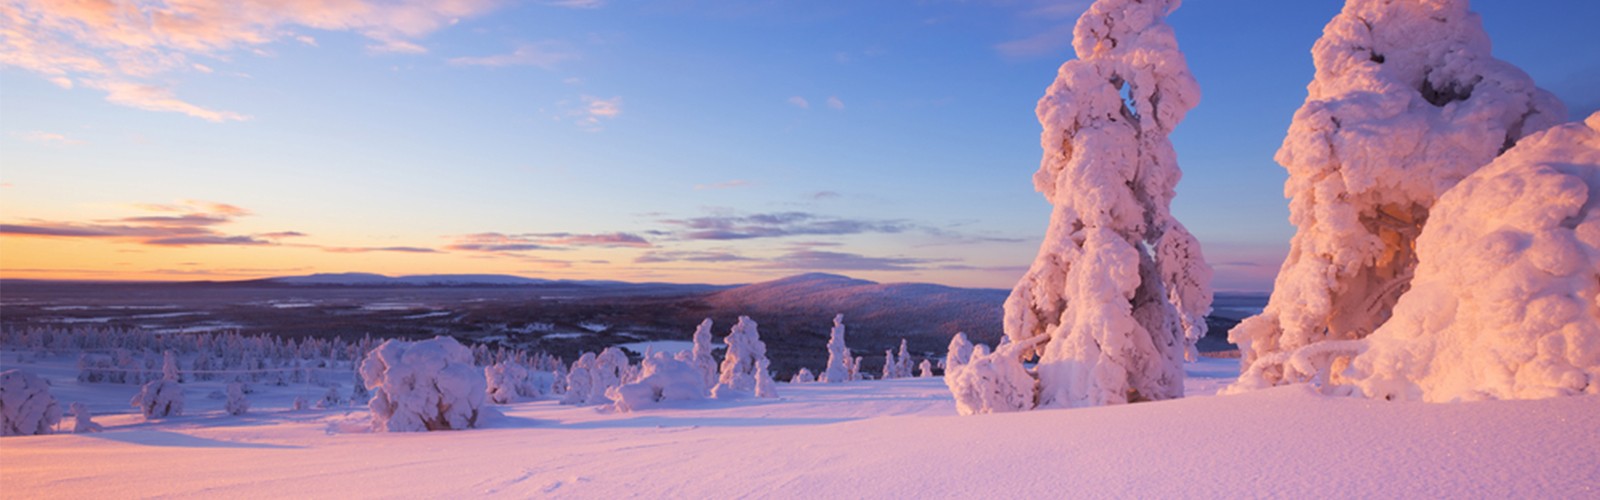 header---where-to-ski-in-scandinavia---luxury-ski-holiday-packages-